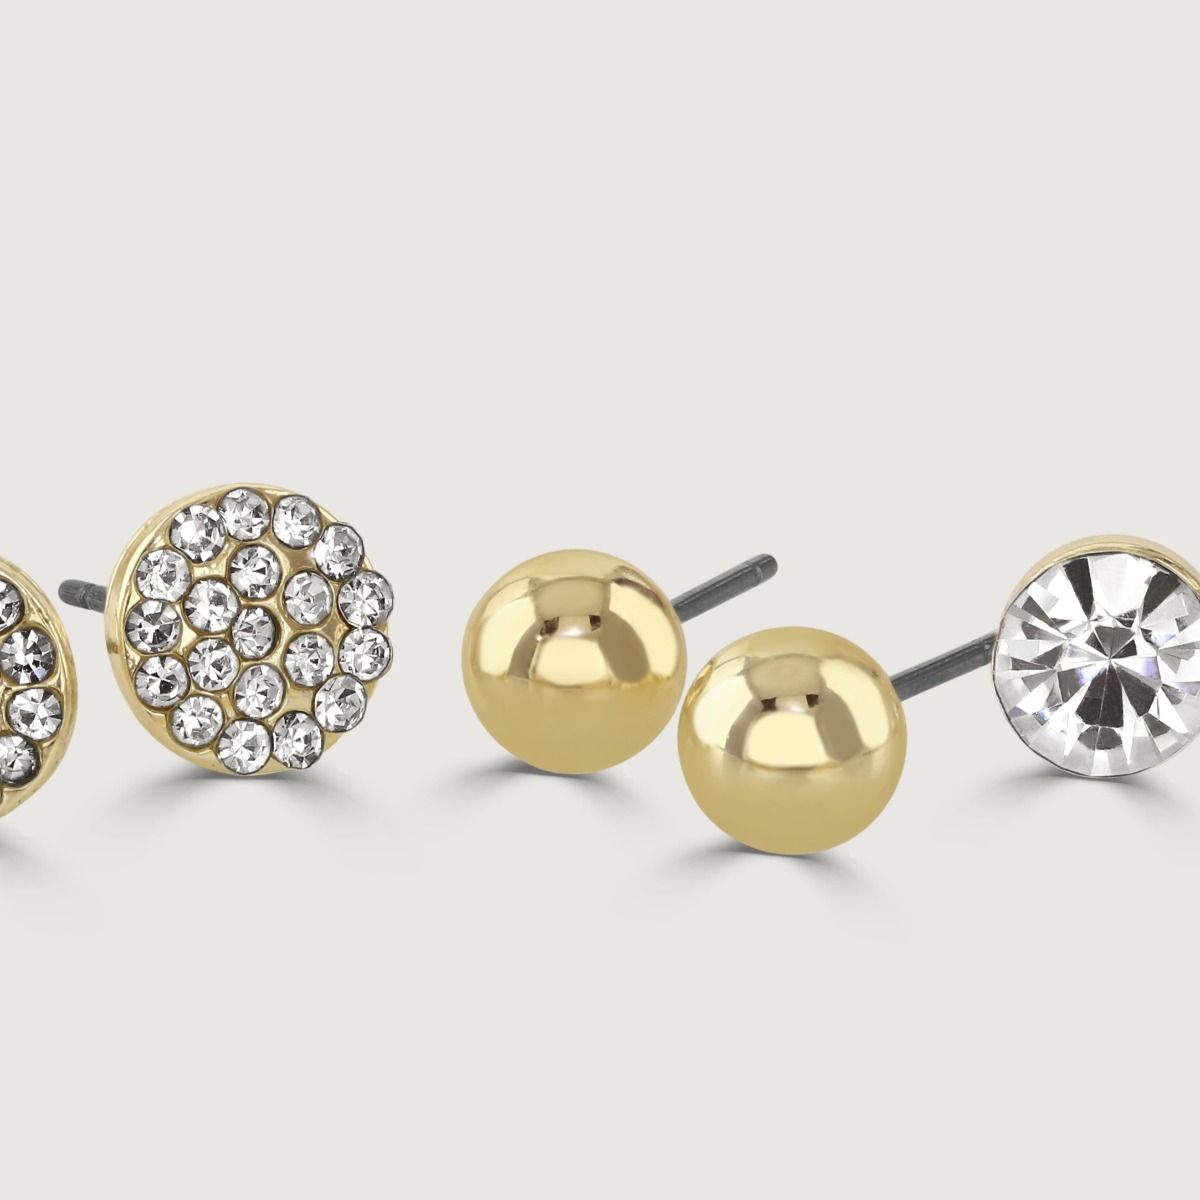 Revitalise your earring collection with this stunning Gold Four Piece Earring Pack. It includes a variety of styles, such as plain studs for a classic touch, sparkling crystal earrings for added glamour, and square-shaped earrings for a modern twist. 